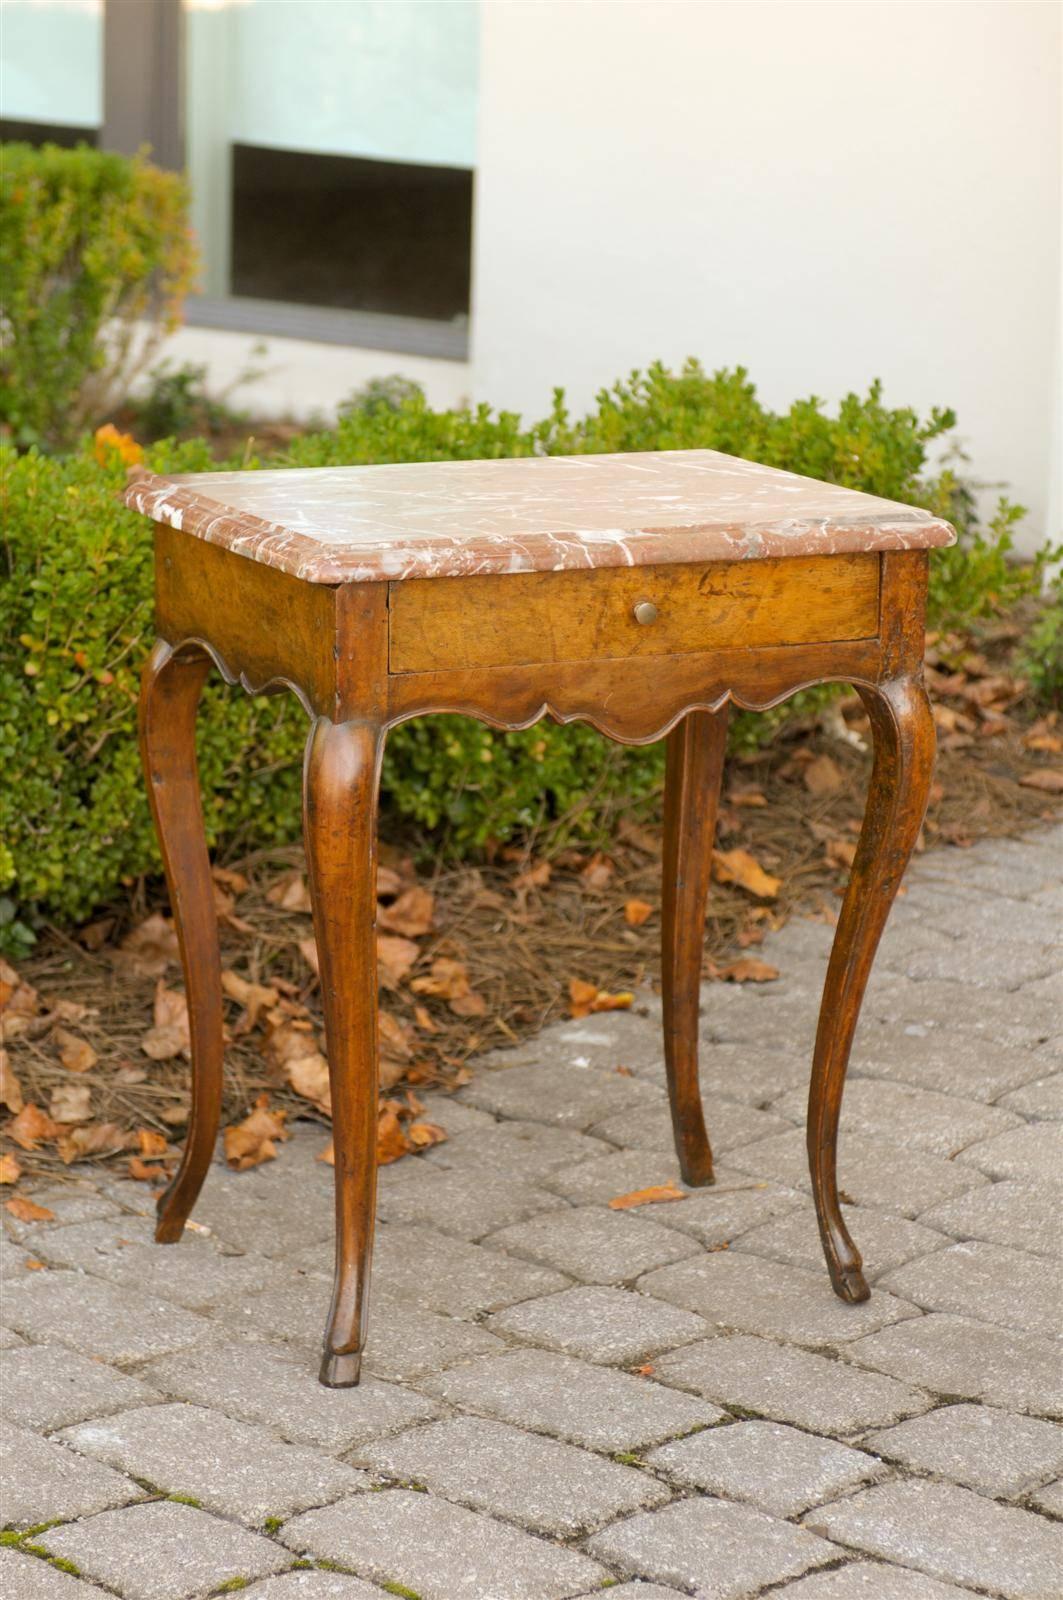 This exquisite French Louis XV style side table from the late 18th century, features a chamfered rectangular royal red and white veined marble top over a single hand-cut, dovetailed drawer. The table is raised on four delicate cabriole legs with